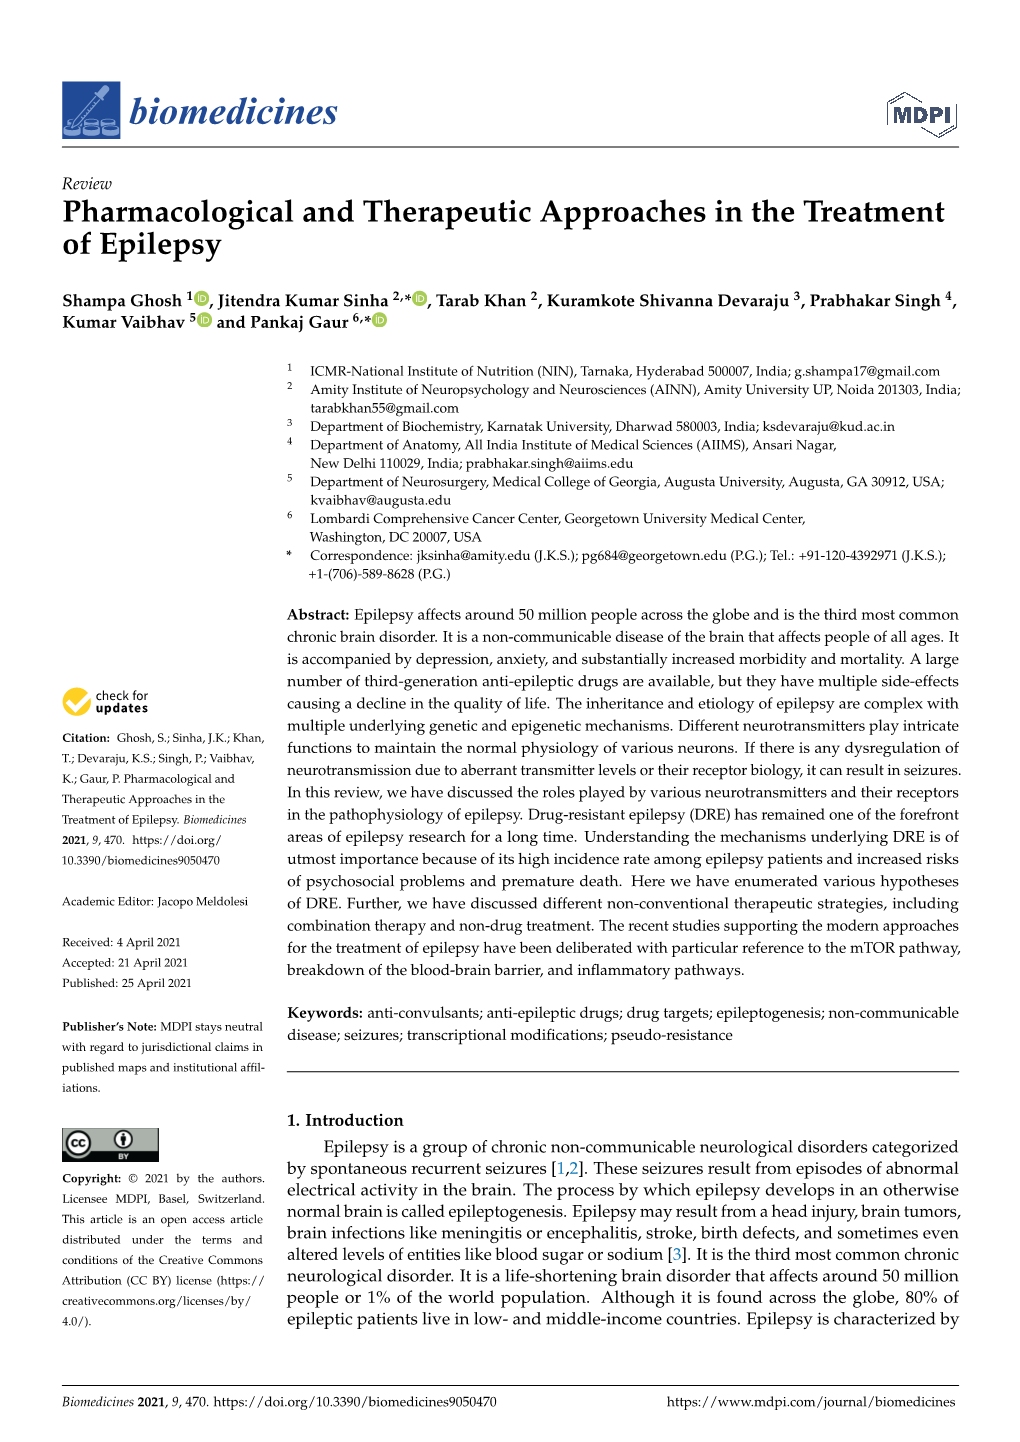 Pharmacological and Therapeutic Approaches in the Treatment of Epilepsy